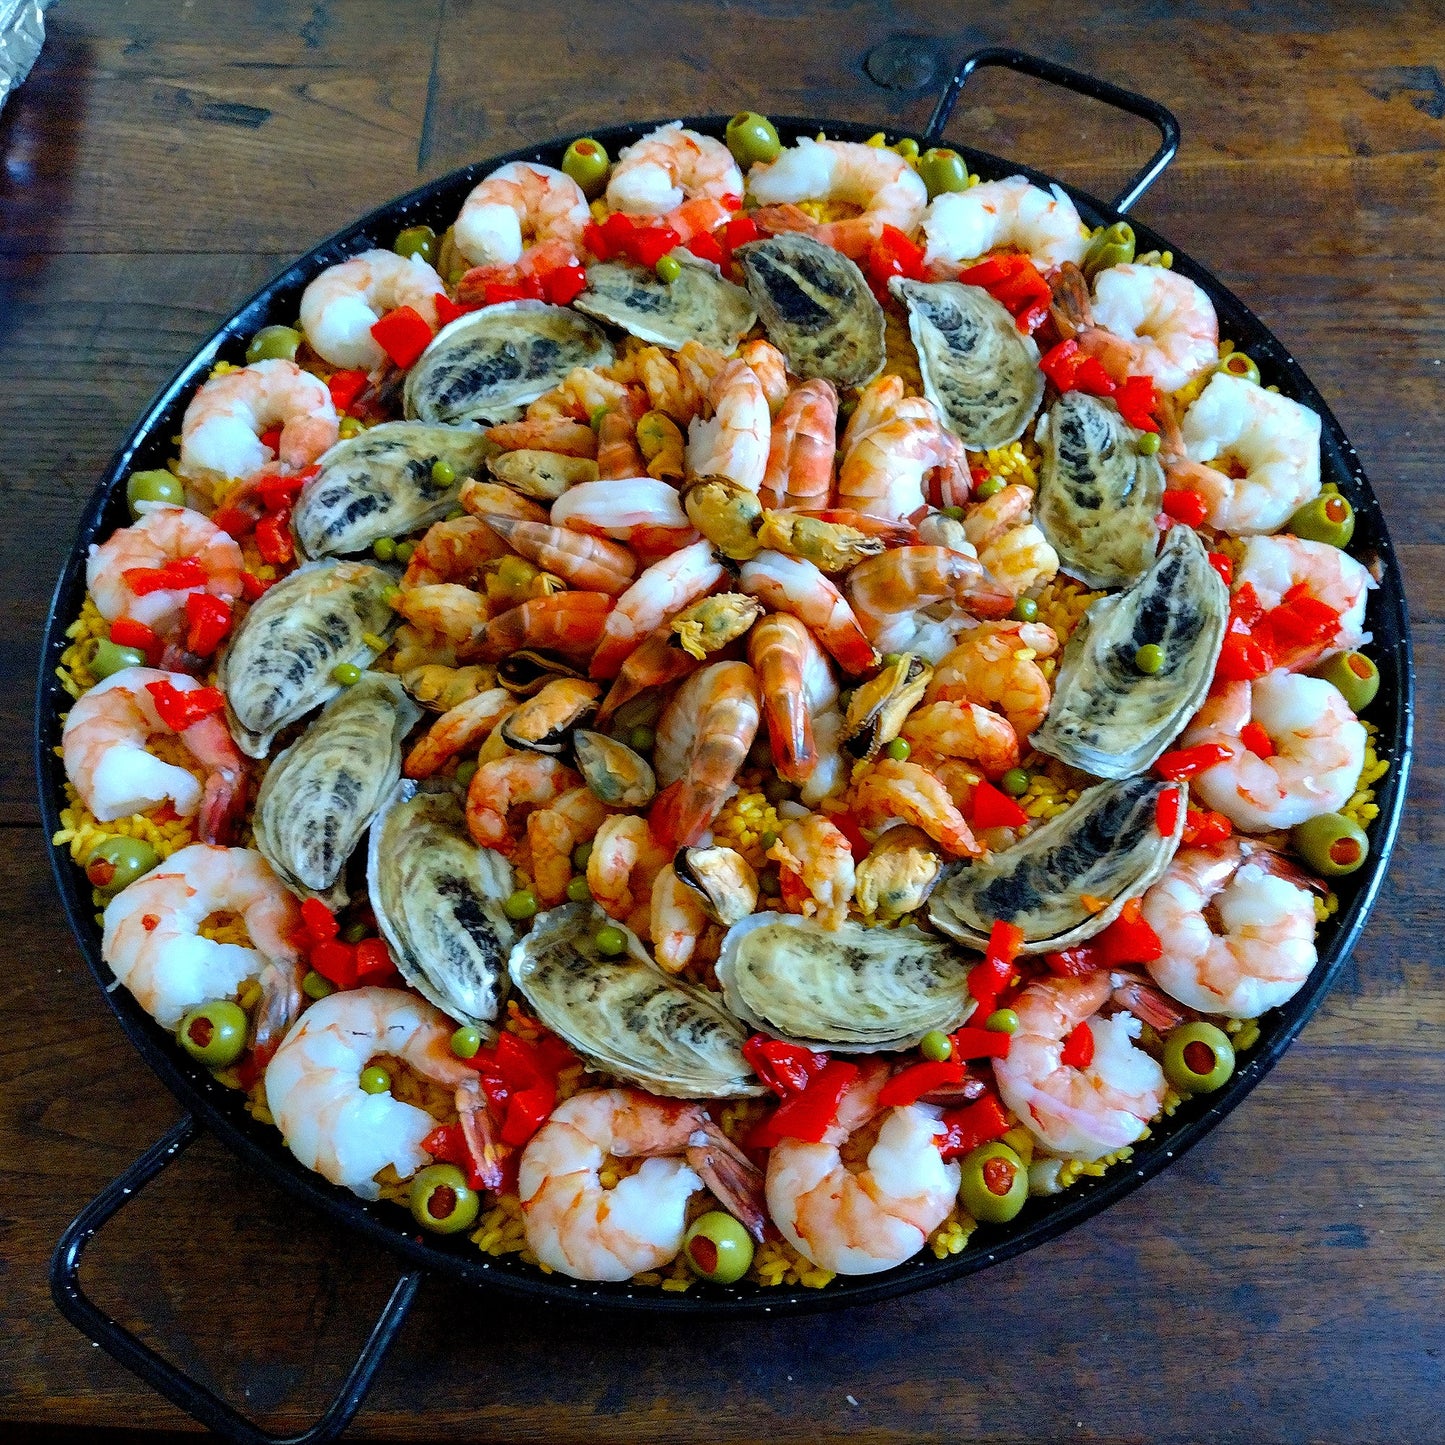 Deluxe paella. Set of six for 75 guests. Paella 5. Key West pink shrimp, local Sebastian Inlet hand-smoked oysters, shrimp fountain with Argentine red, Black Tiger and colossal freshwater prawns.